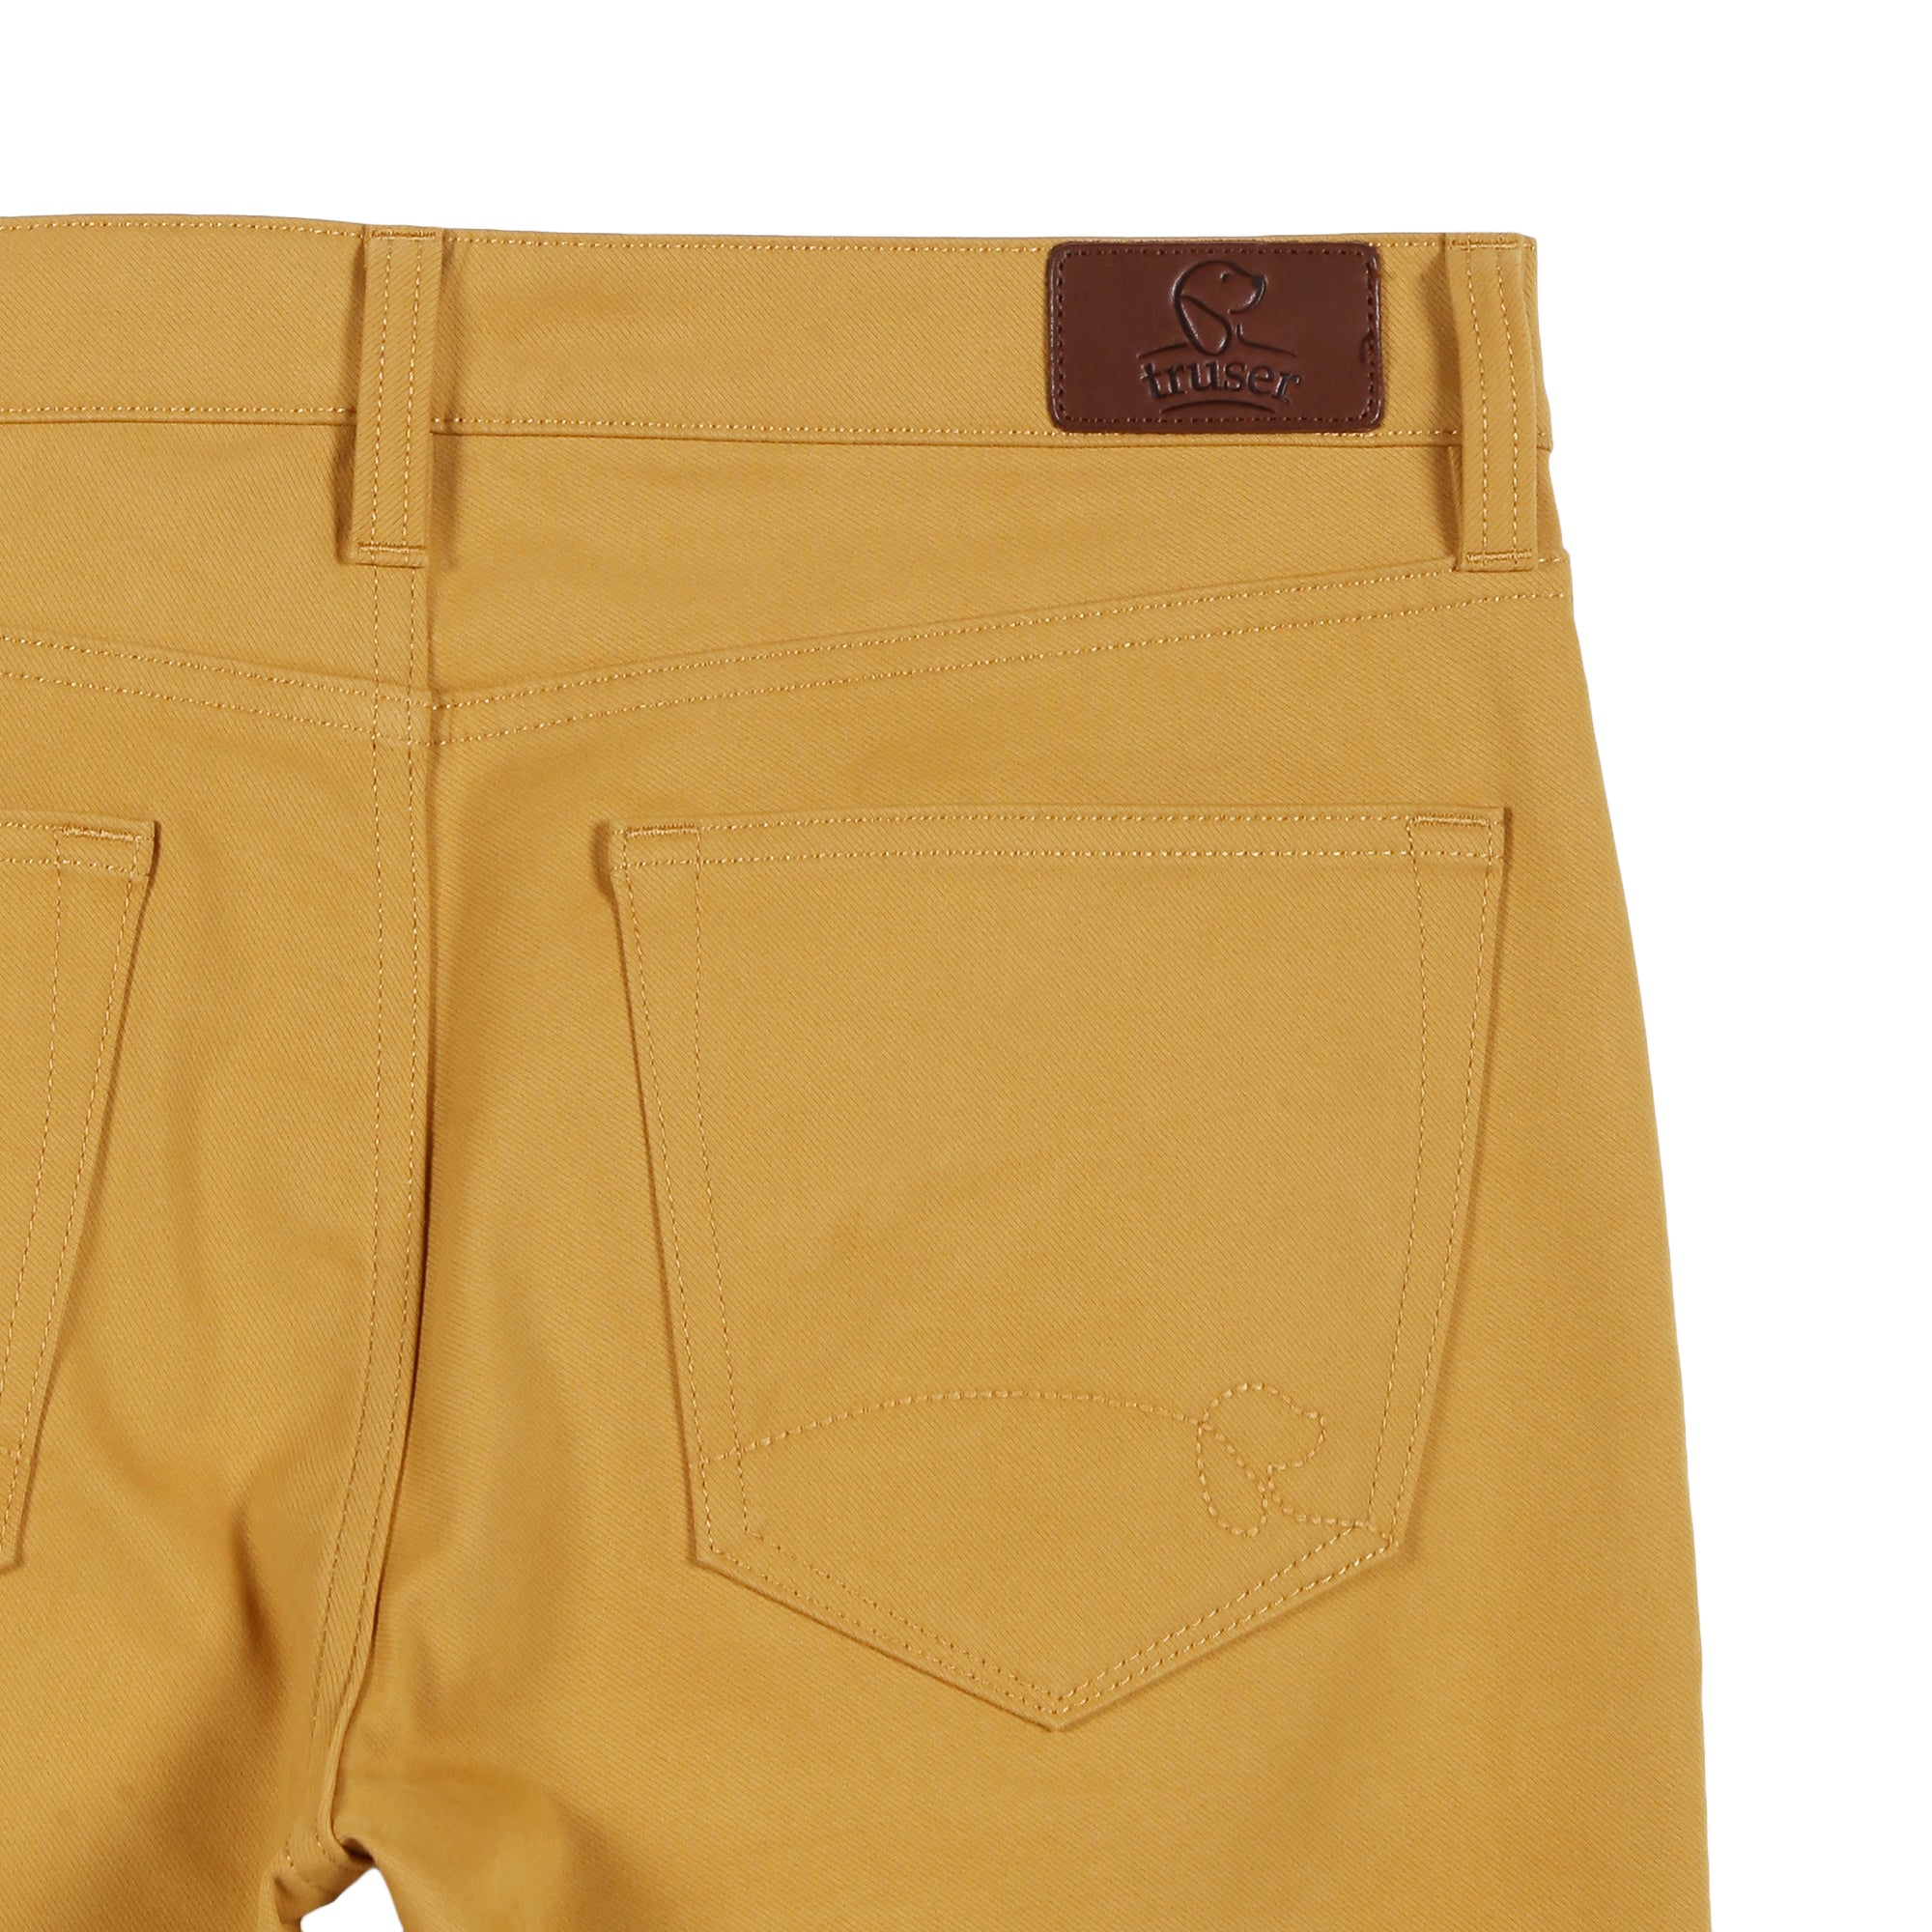 STRAIGHT FIT LUXE FIVE-POCKET PANTS - OCHRE